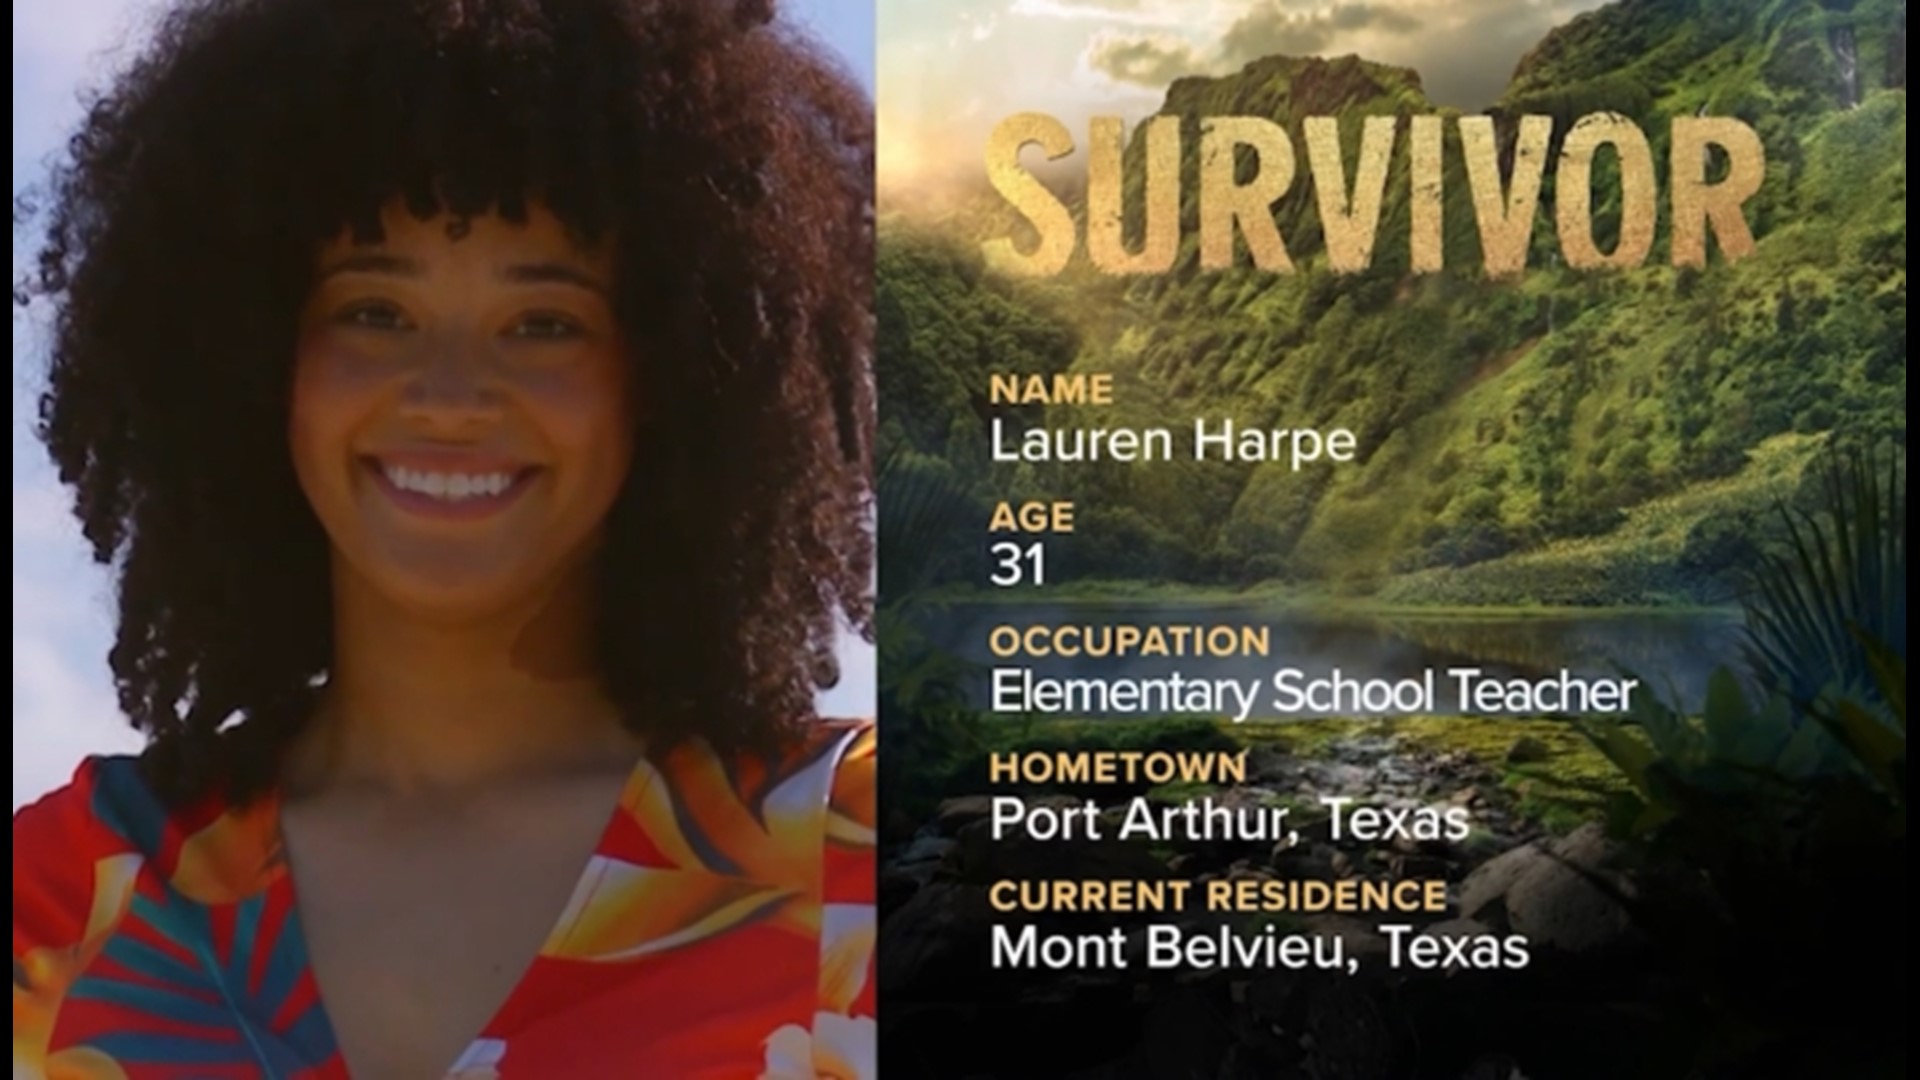 Lauren Harpe, 31, will be competing in the 2023 season of 'Survivor.' She is from Port Arthur, Texas but currently resides in Mont Belvieu, Texas.